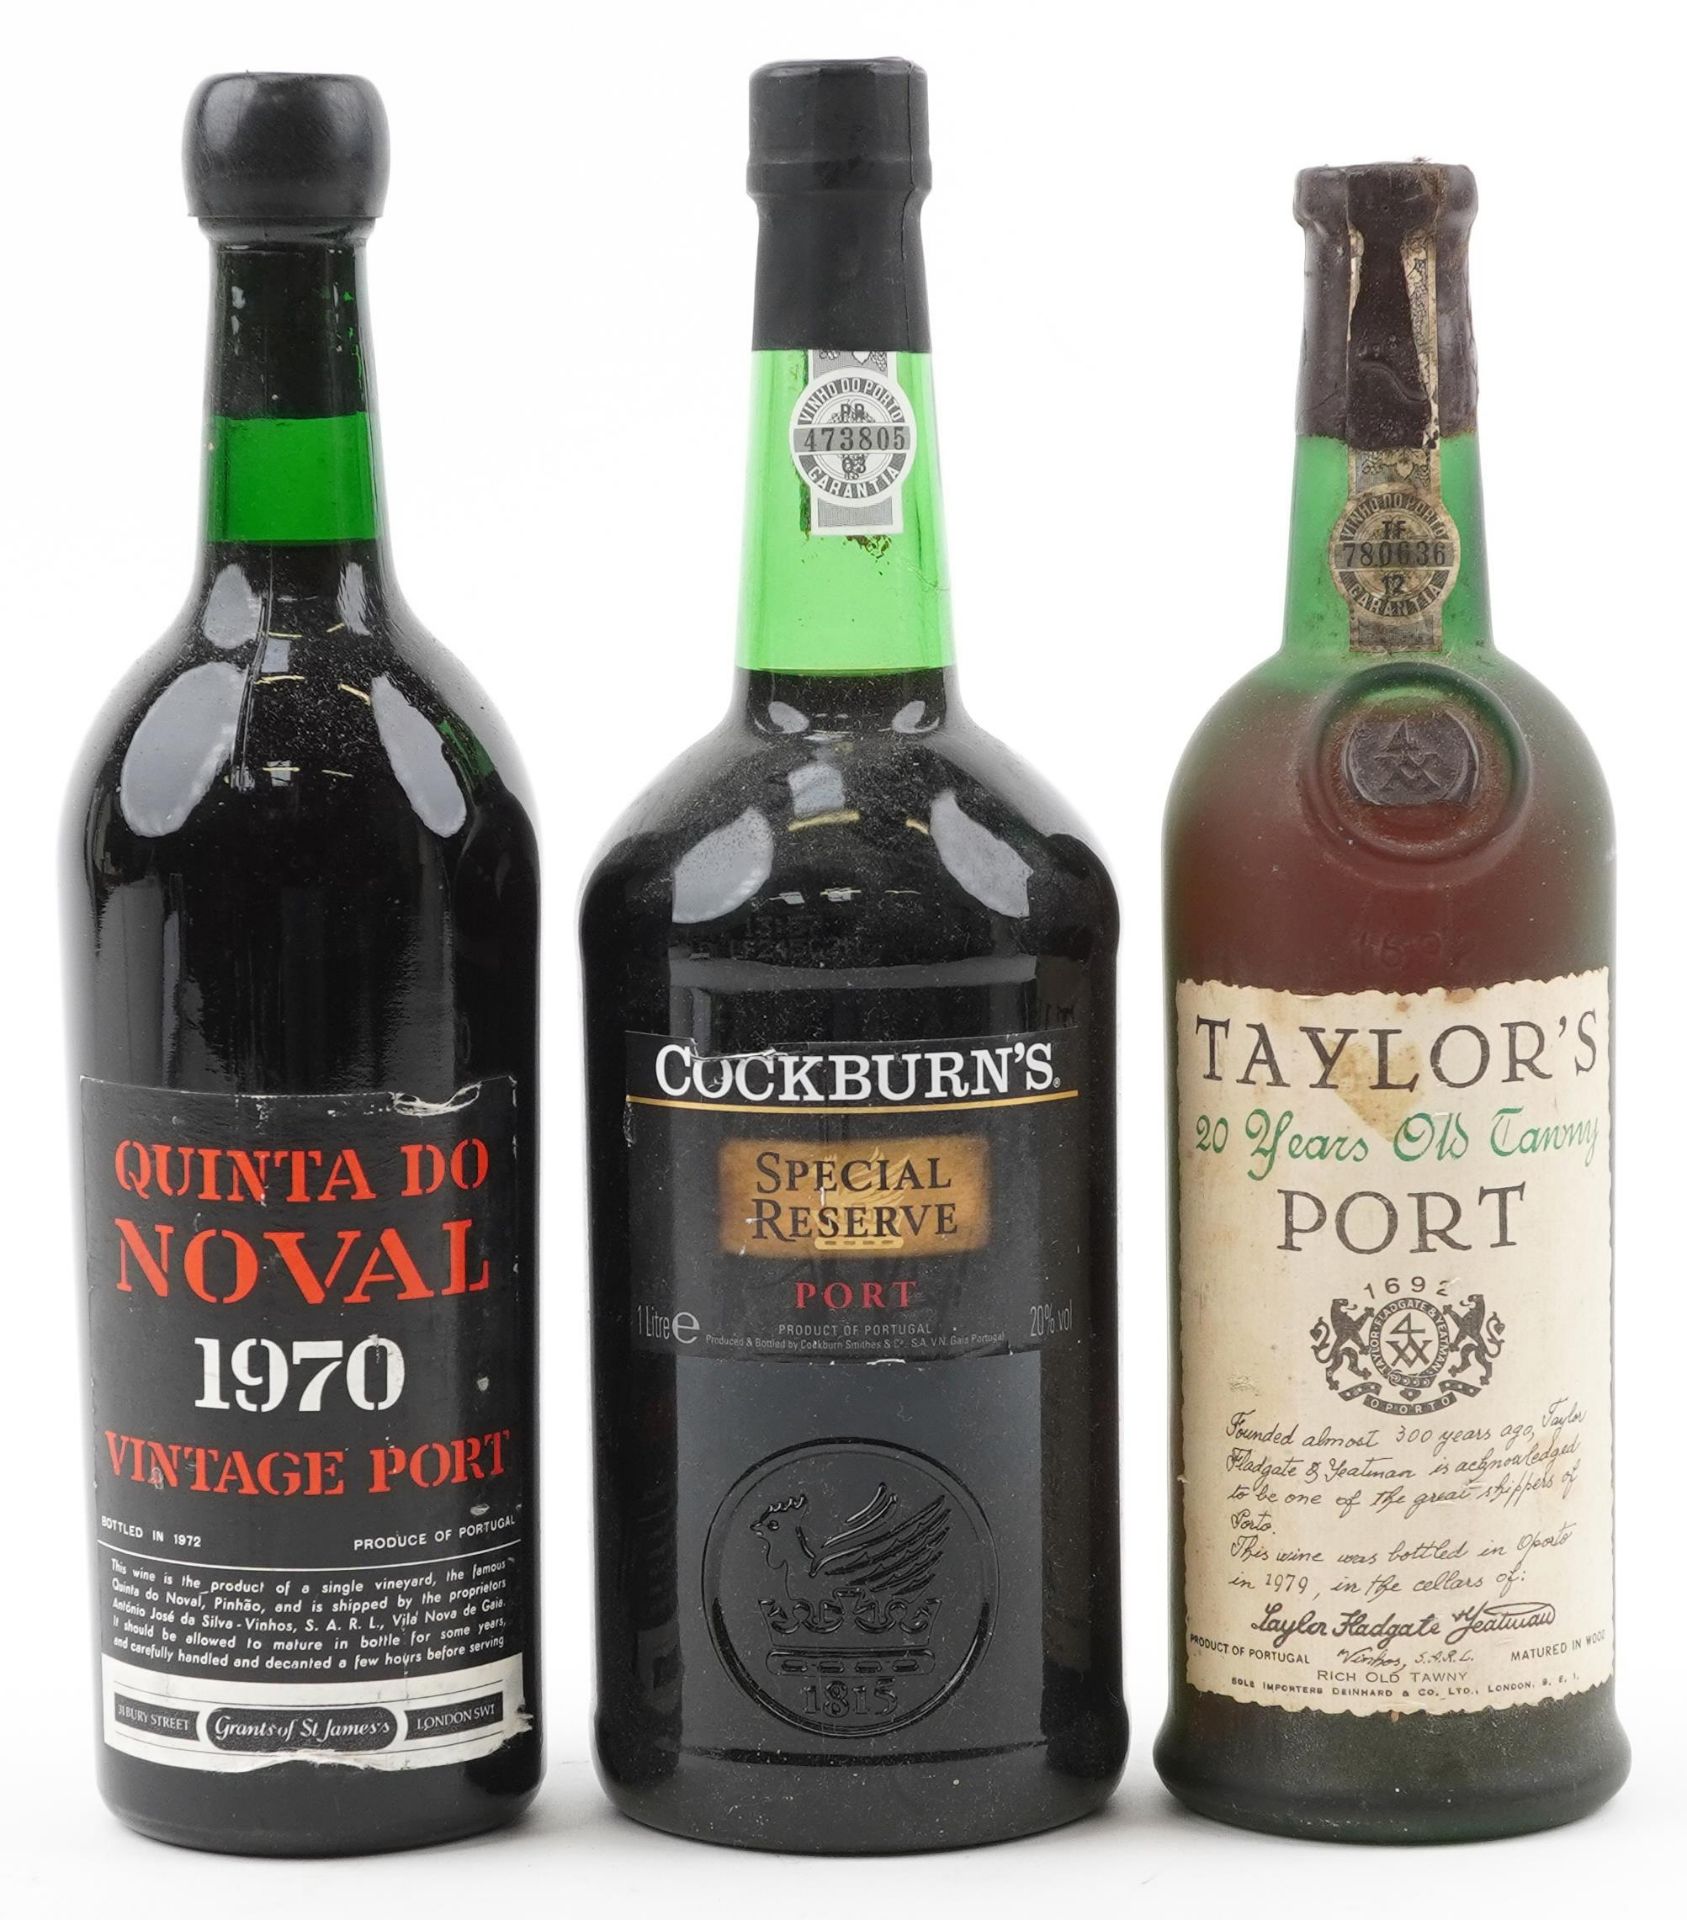 Three bottles of port comprising Taylor's 20 Years Old Tawny port, Cockburn's Special Reserve and